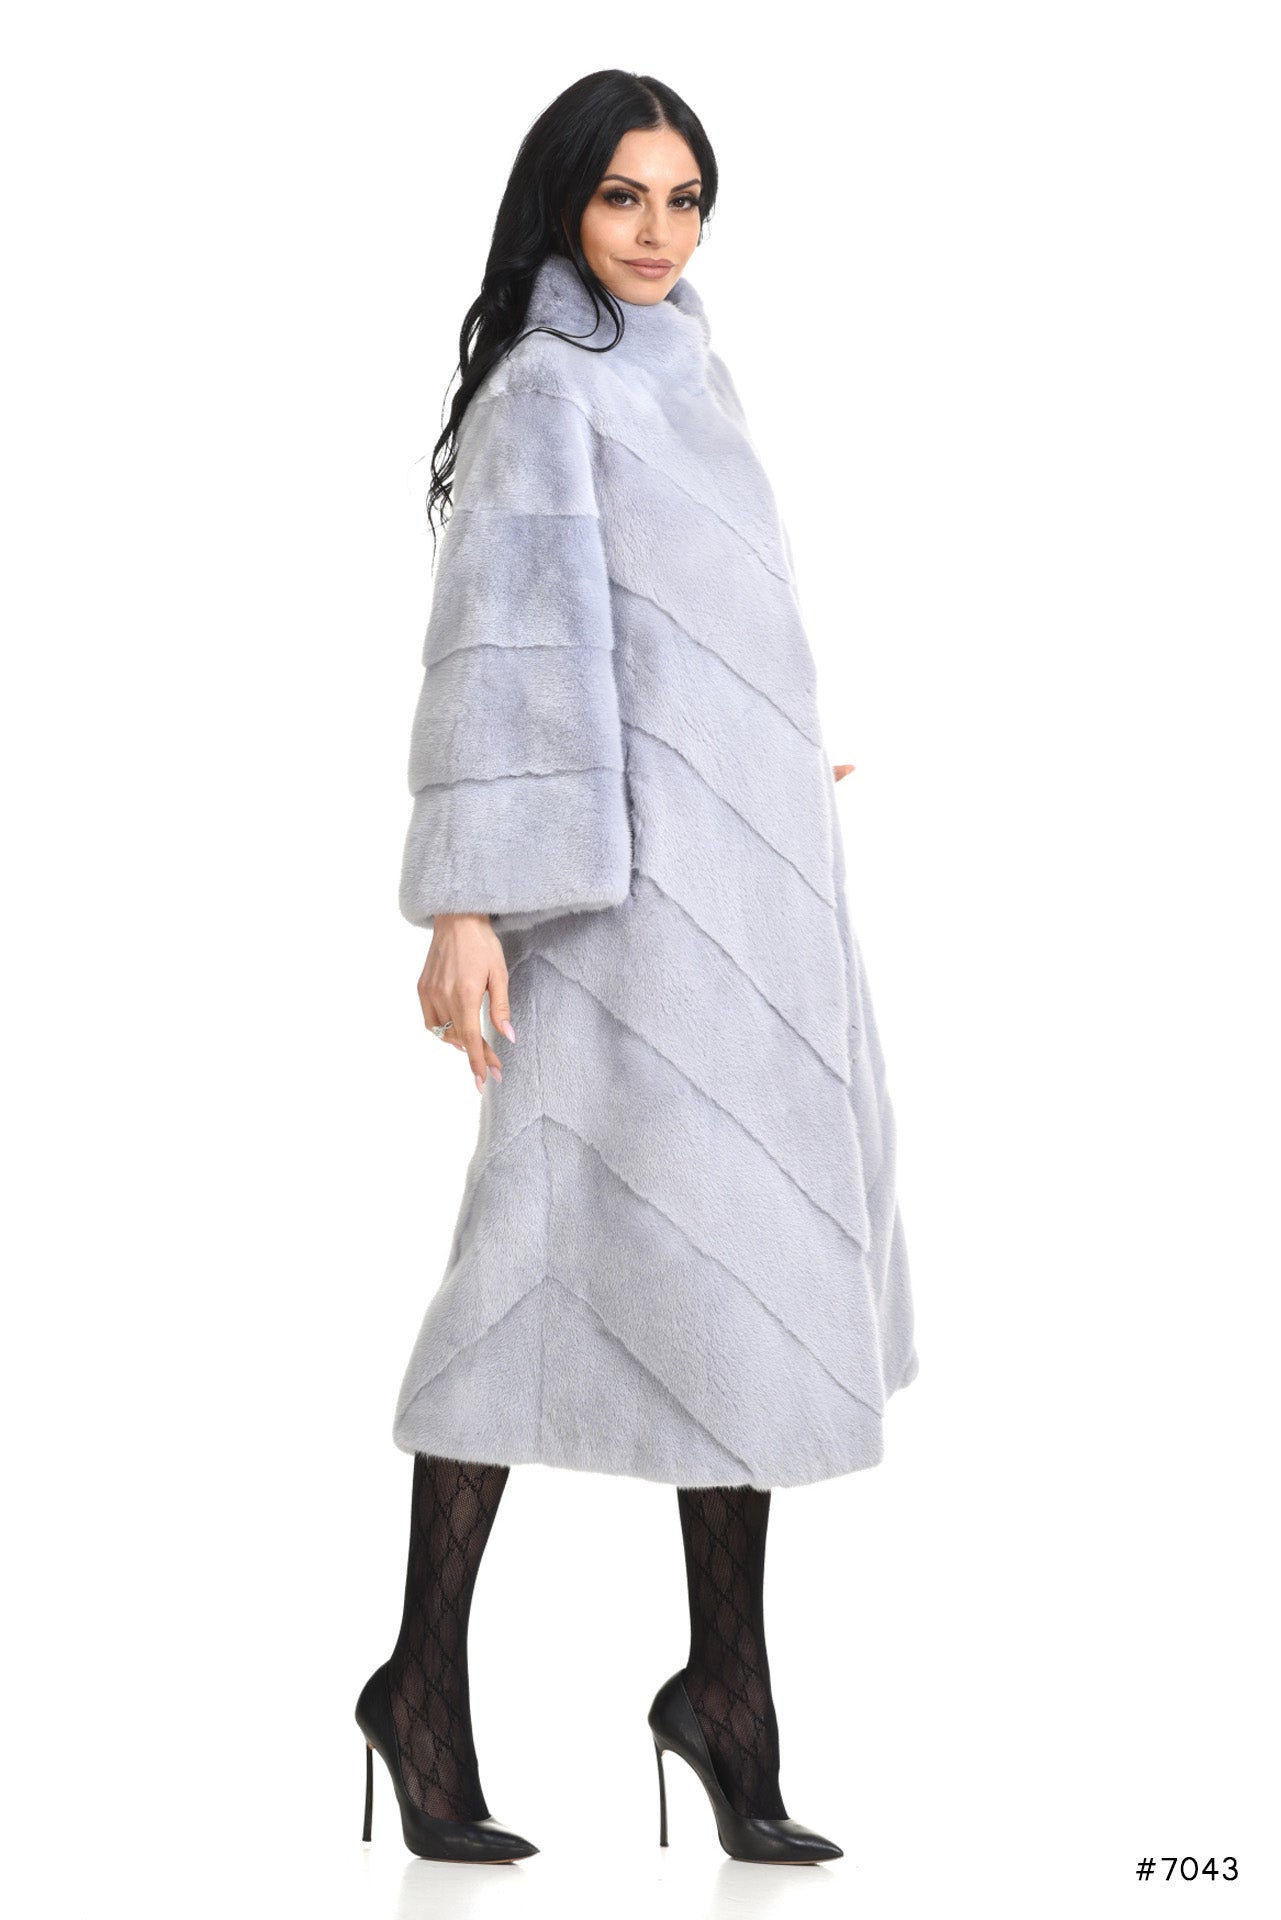 Long diagonal worked mink coat with stand up collar